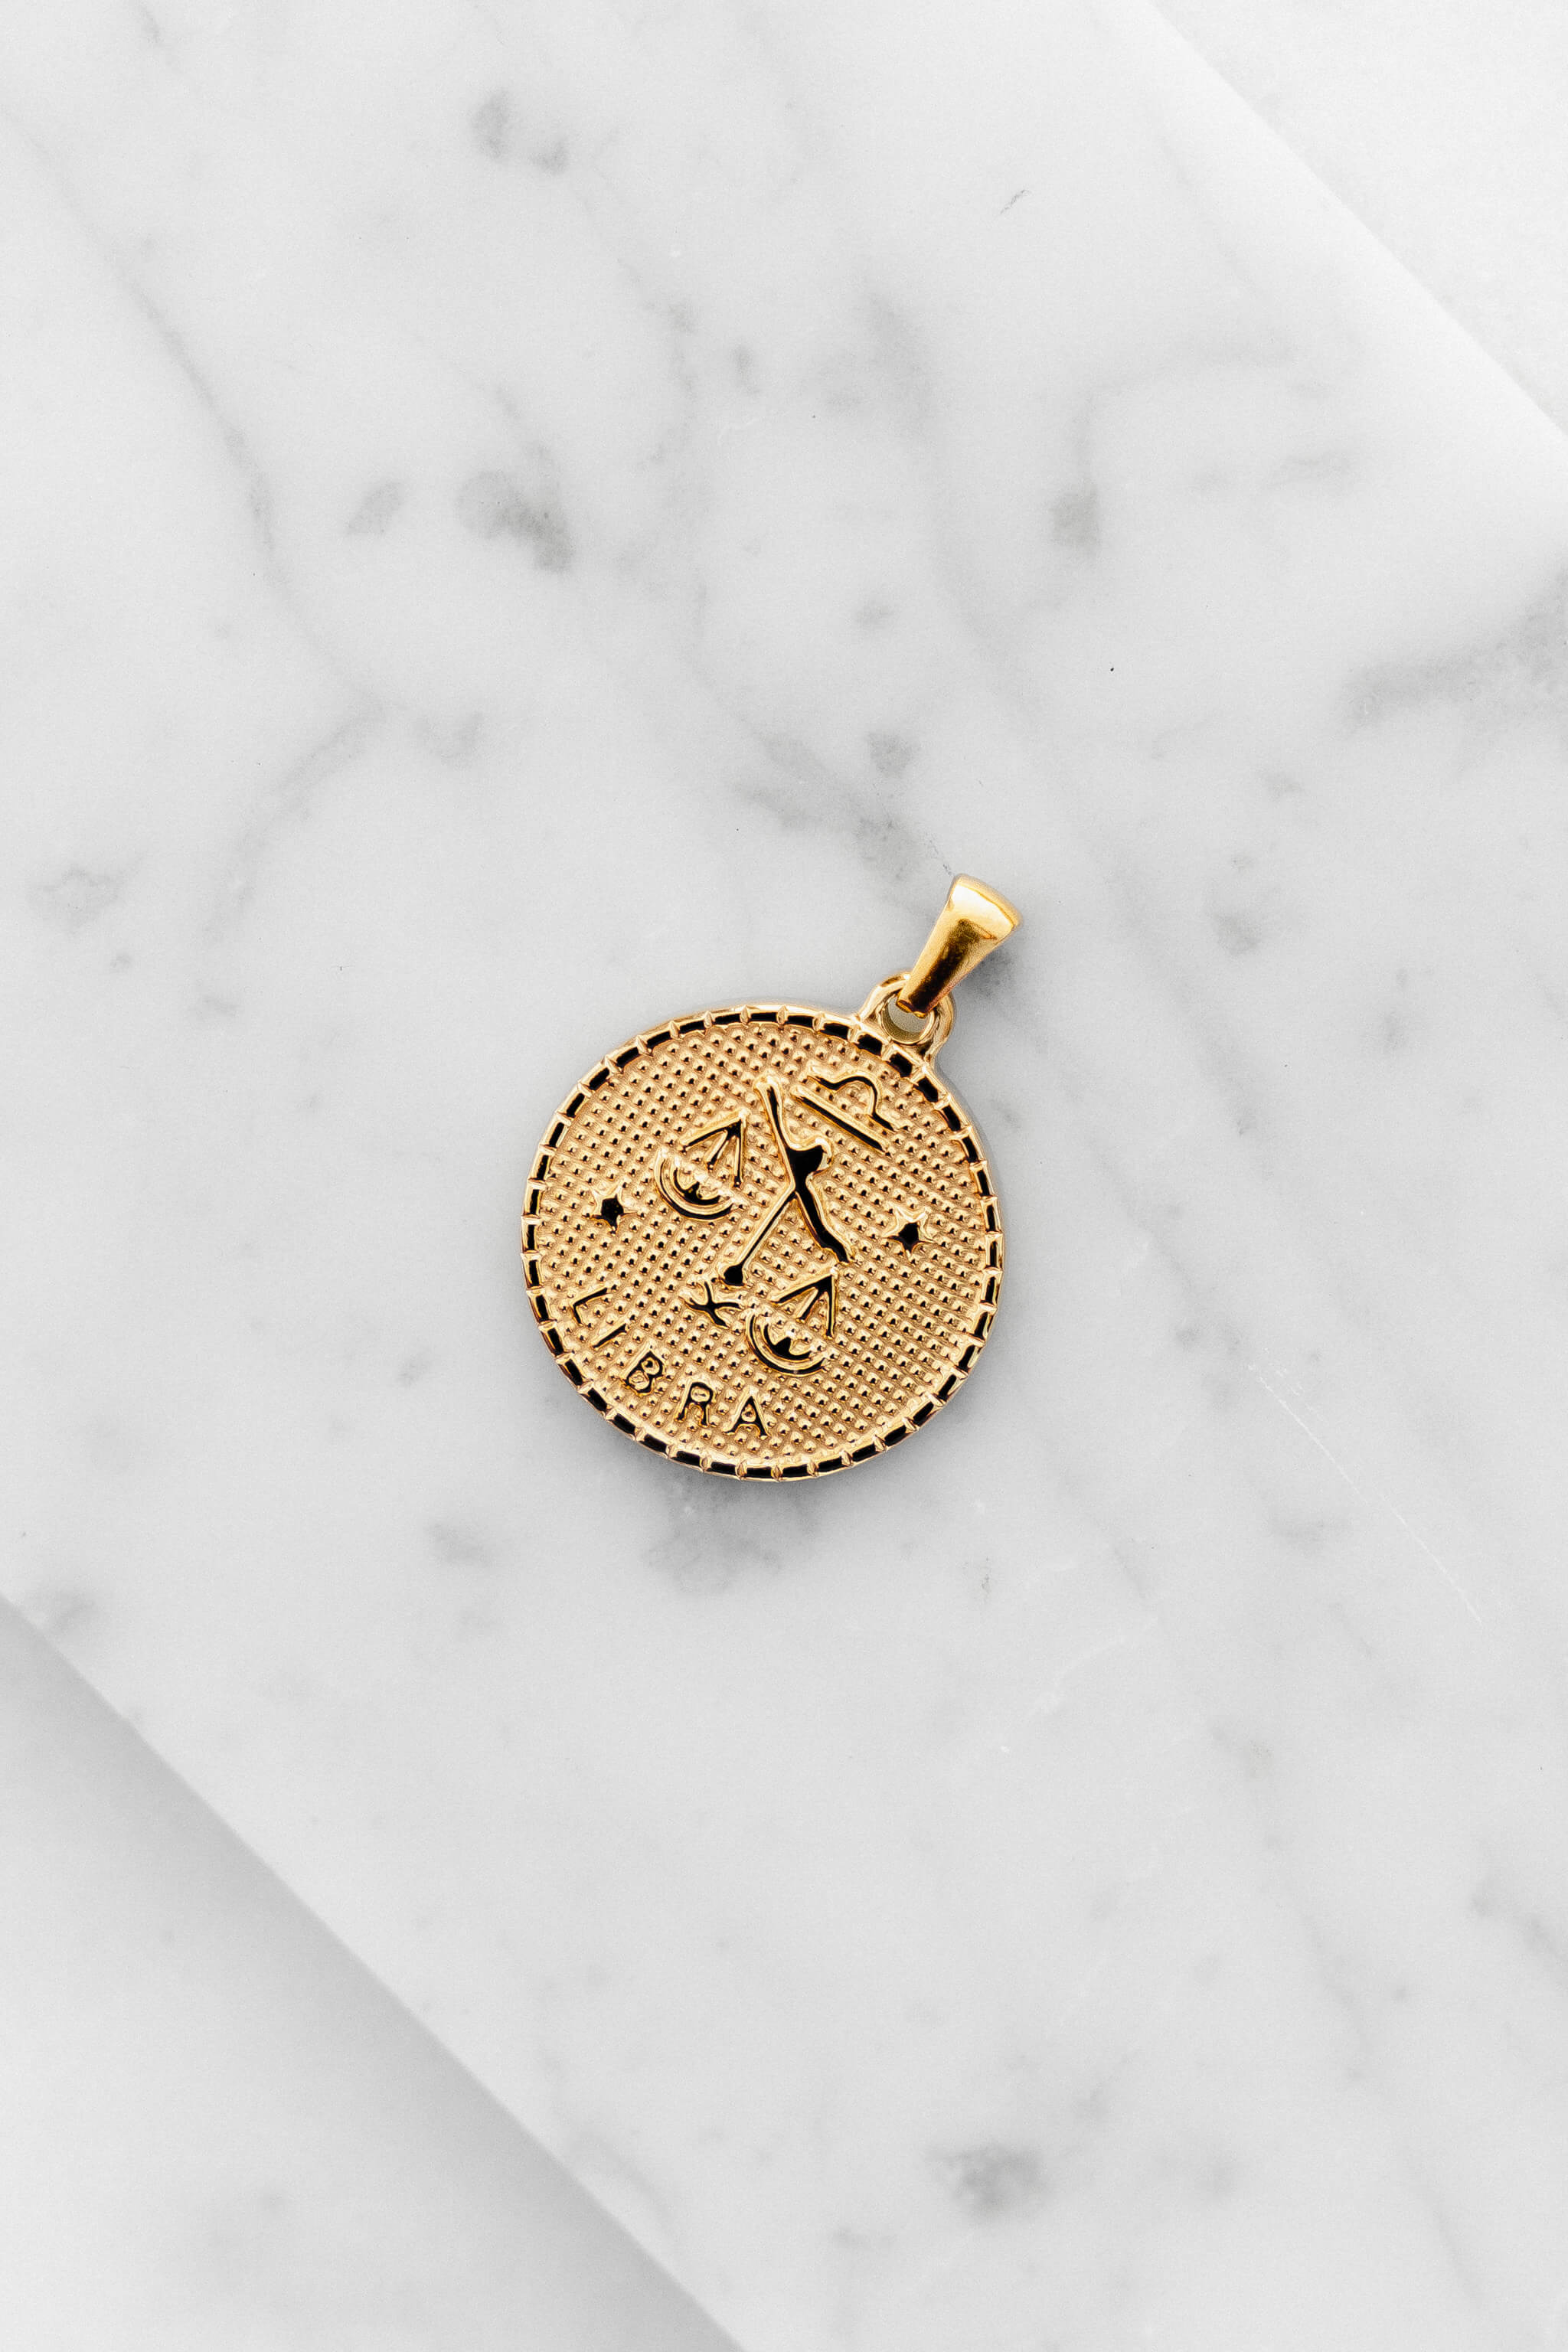 Libra zodiac sign gold coin charm laying on a white marble